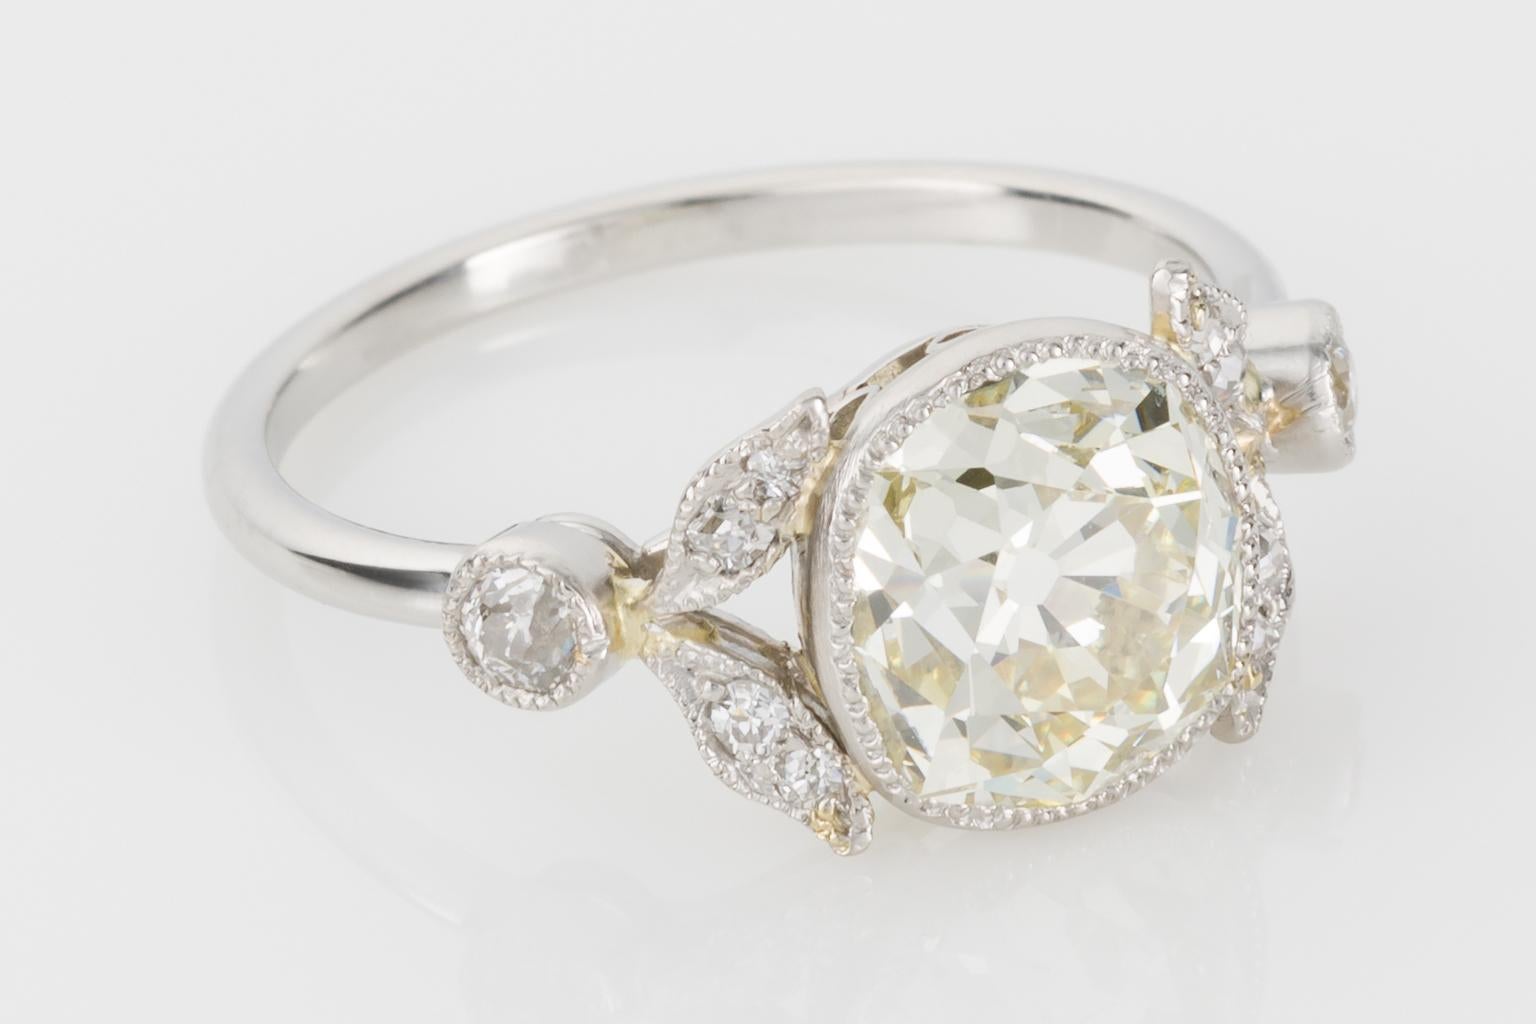 This ring is just perfection, it fits the criteria for every womans dream engagement ring.  From the central old cushion cut diamond which weighs approximately 2.40cts to the elegant leaf details & the delicate platinum mounting, I can't see any